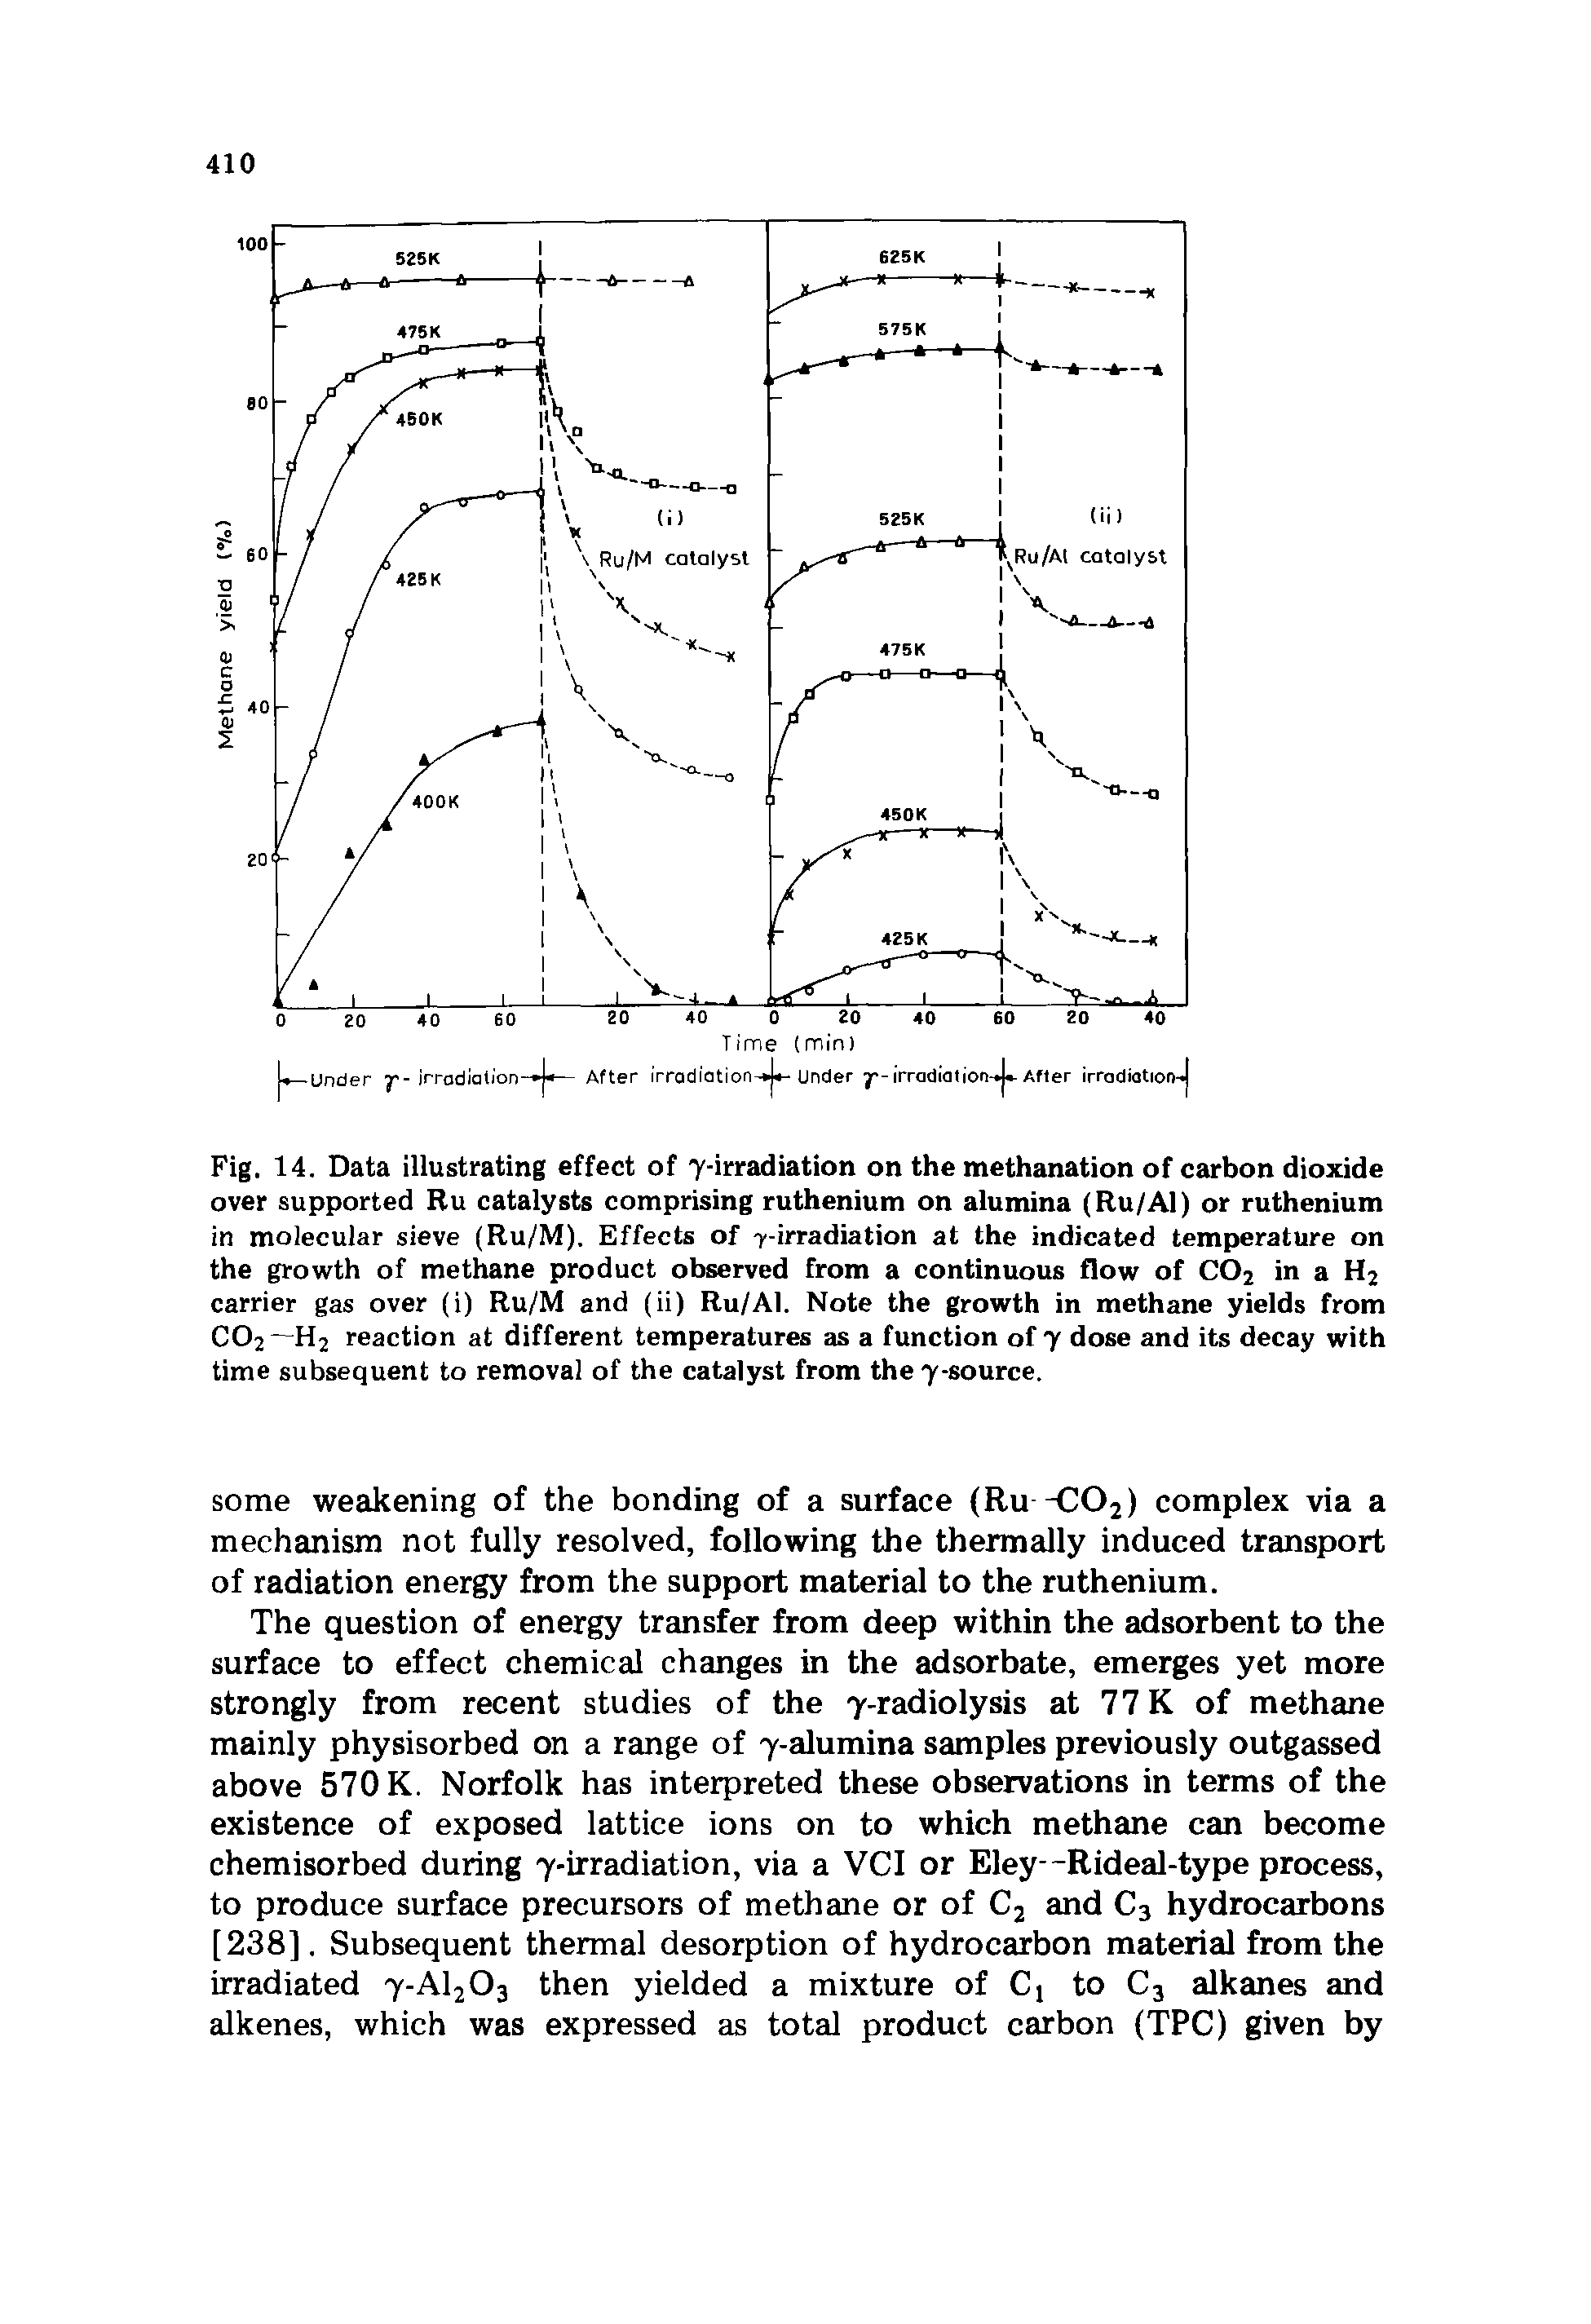 Fig. 14. Data illustrating effect of 7-irradiation on the methanation of carbon dioxide over supported Ru catalysts comprising ruthenium on alumina (Ru/Al) or ruthenium in molecular sieve (Ru/M). Effects of 7-irradiation at the indicated temperature on the growth of methane product observed from a continuous flow of C02 in a H2 carrier gas over (i) Ru/M and (ii) Ru/Al. Note the growth in methane yields from C02—H2 reaction at different temperatures as a function of 7 dose and its decay with time subsequent to removal of the catalyst from the 7-source.